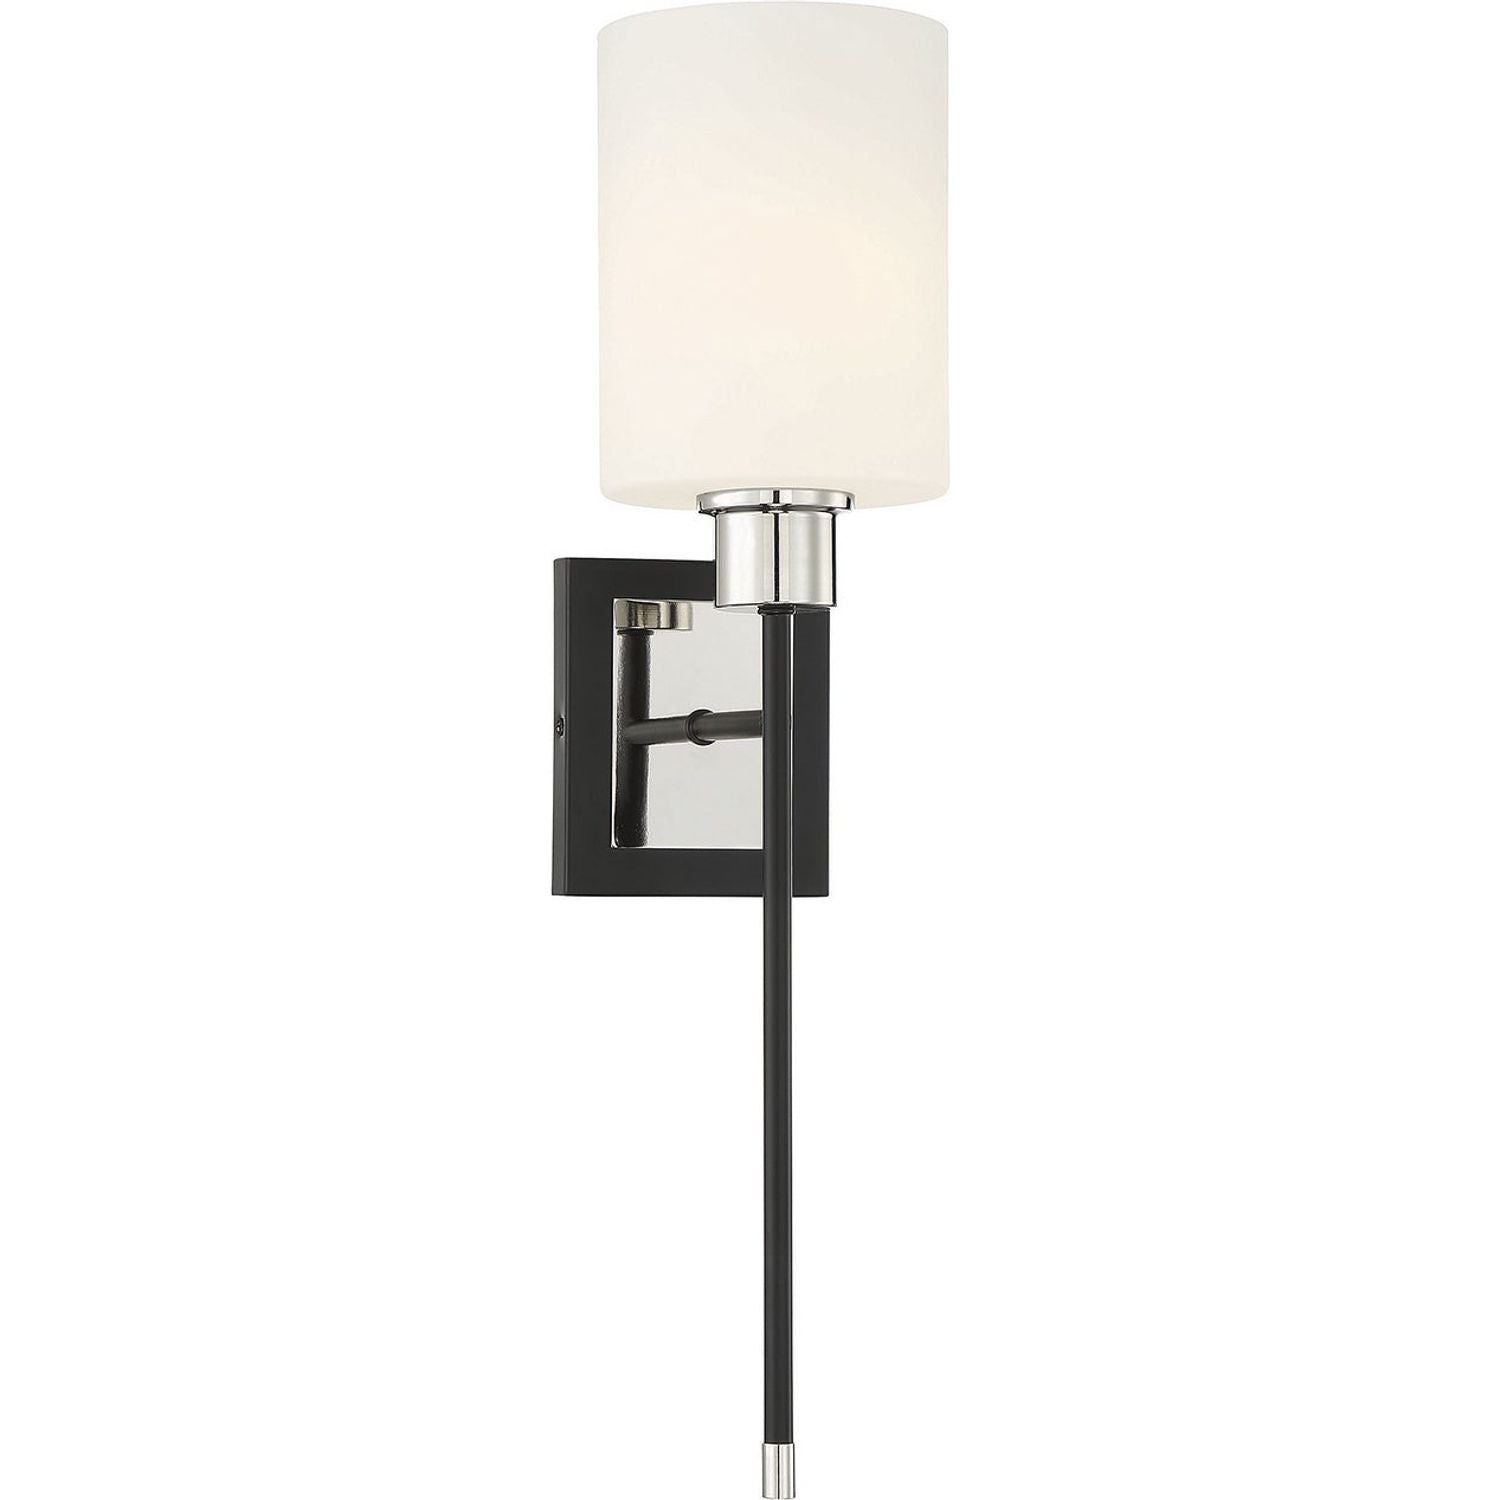 Savoy House - 9-1645-1-173 - One Light Wall Sconce - Alvara - Matte Black with Polished Nickel Accents